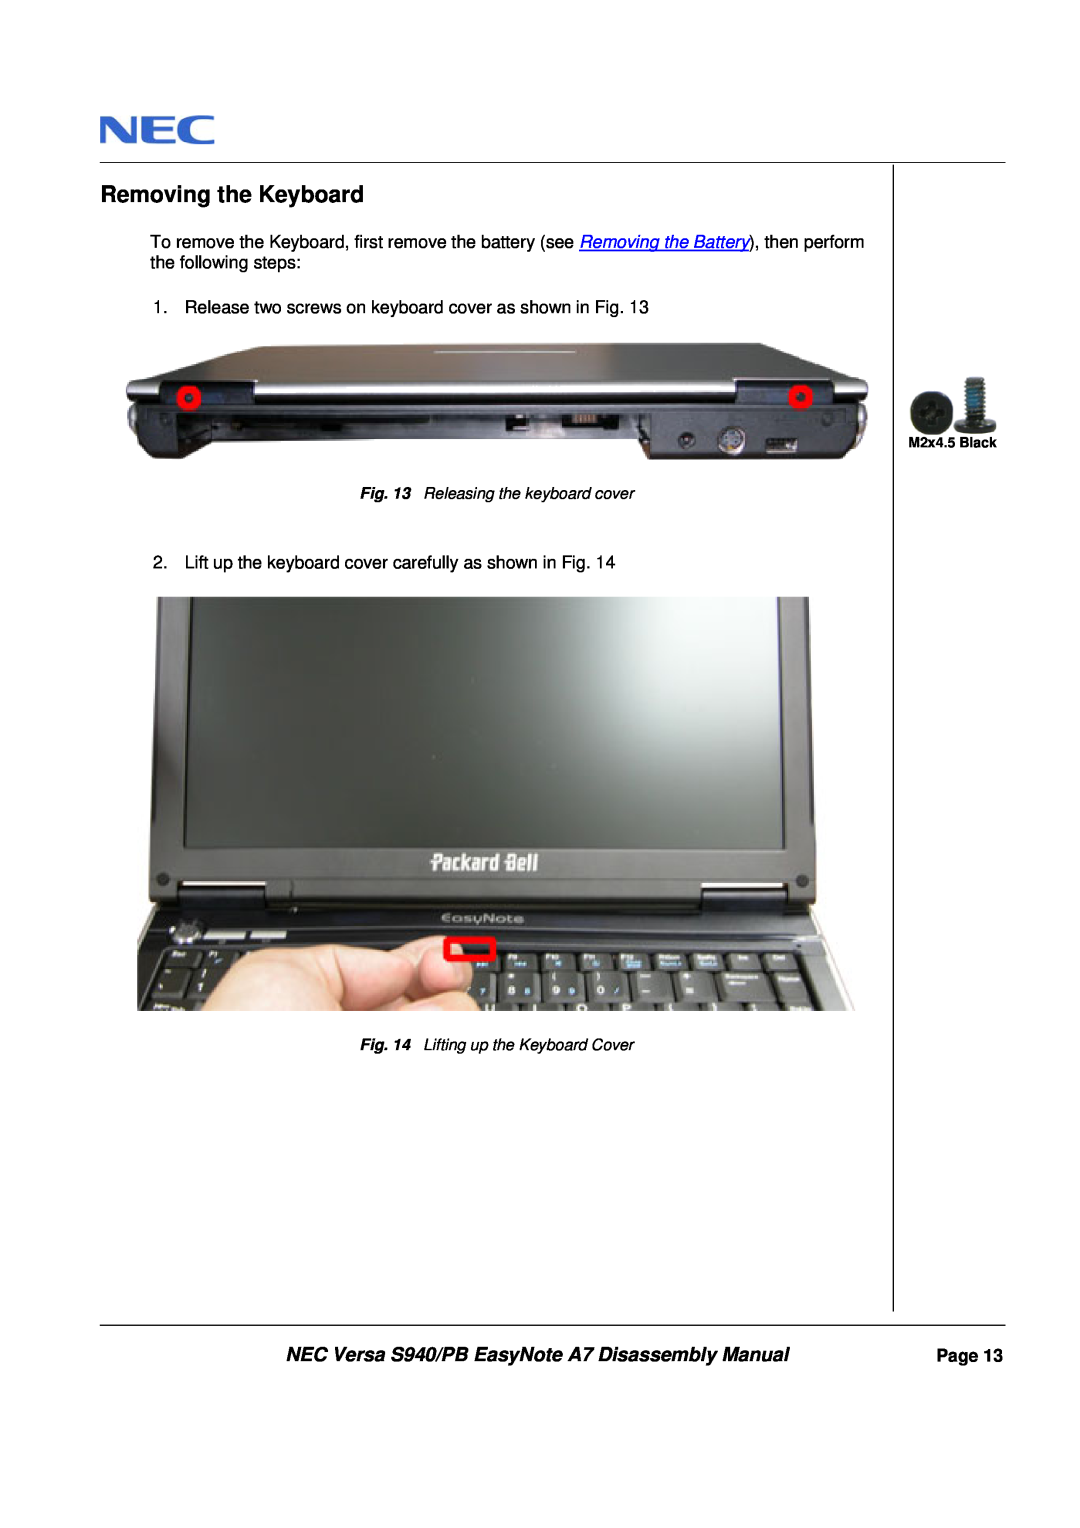 Packard Bell Removing the Keyboard, NEC Versa S940/PB EasyNote A7 Disassembly Manual, Releasing the keyboard cover 